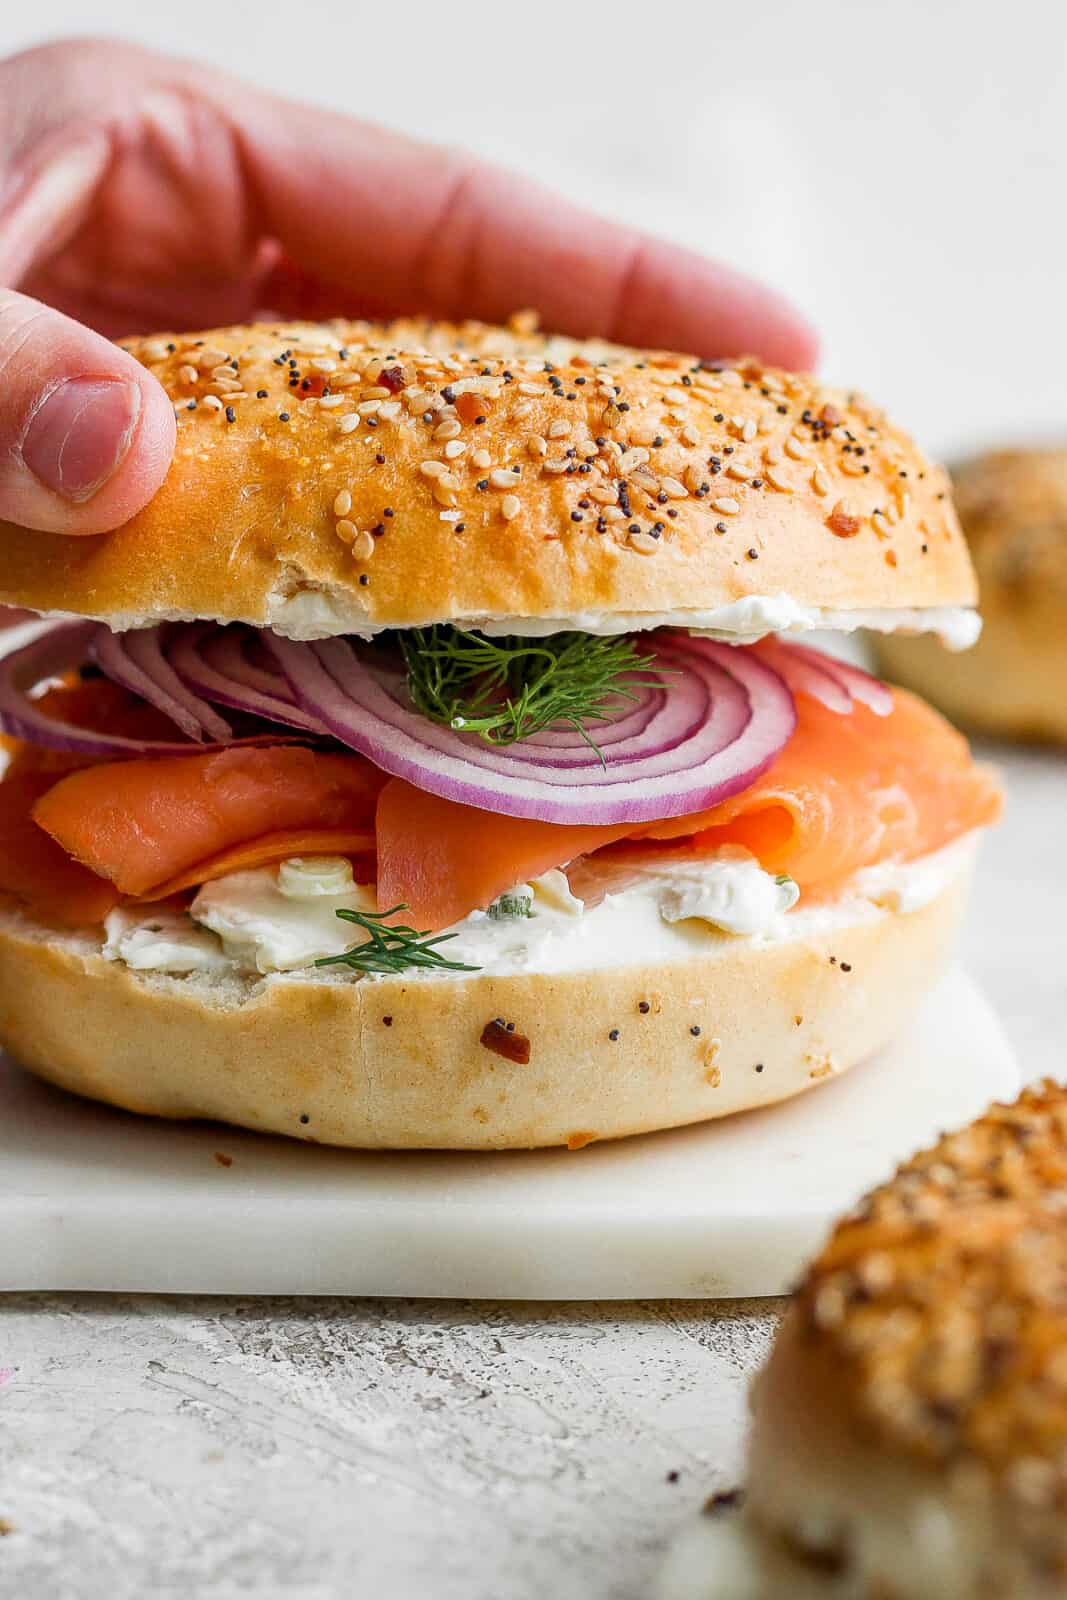 A hand placing the top half of a bagel on top.